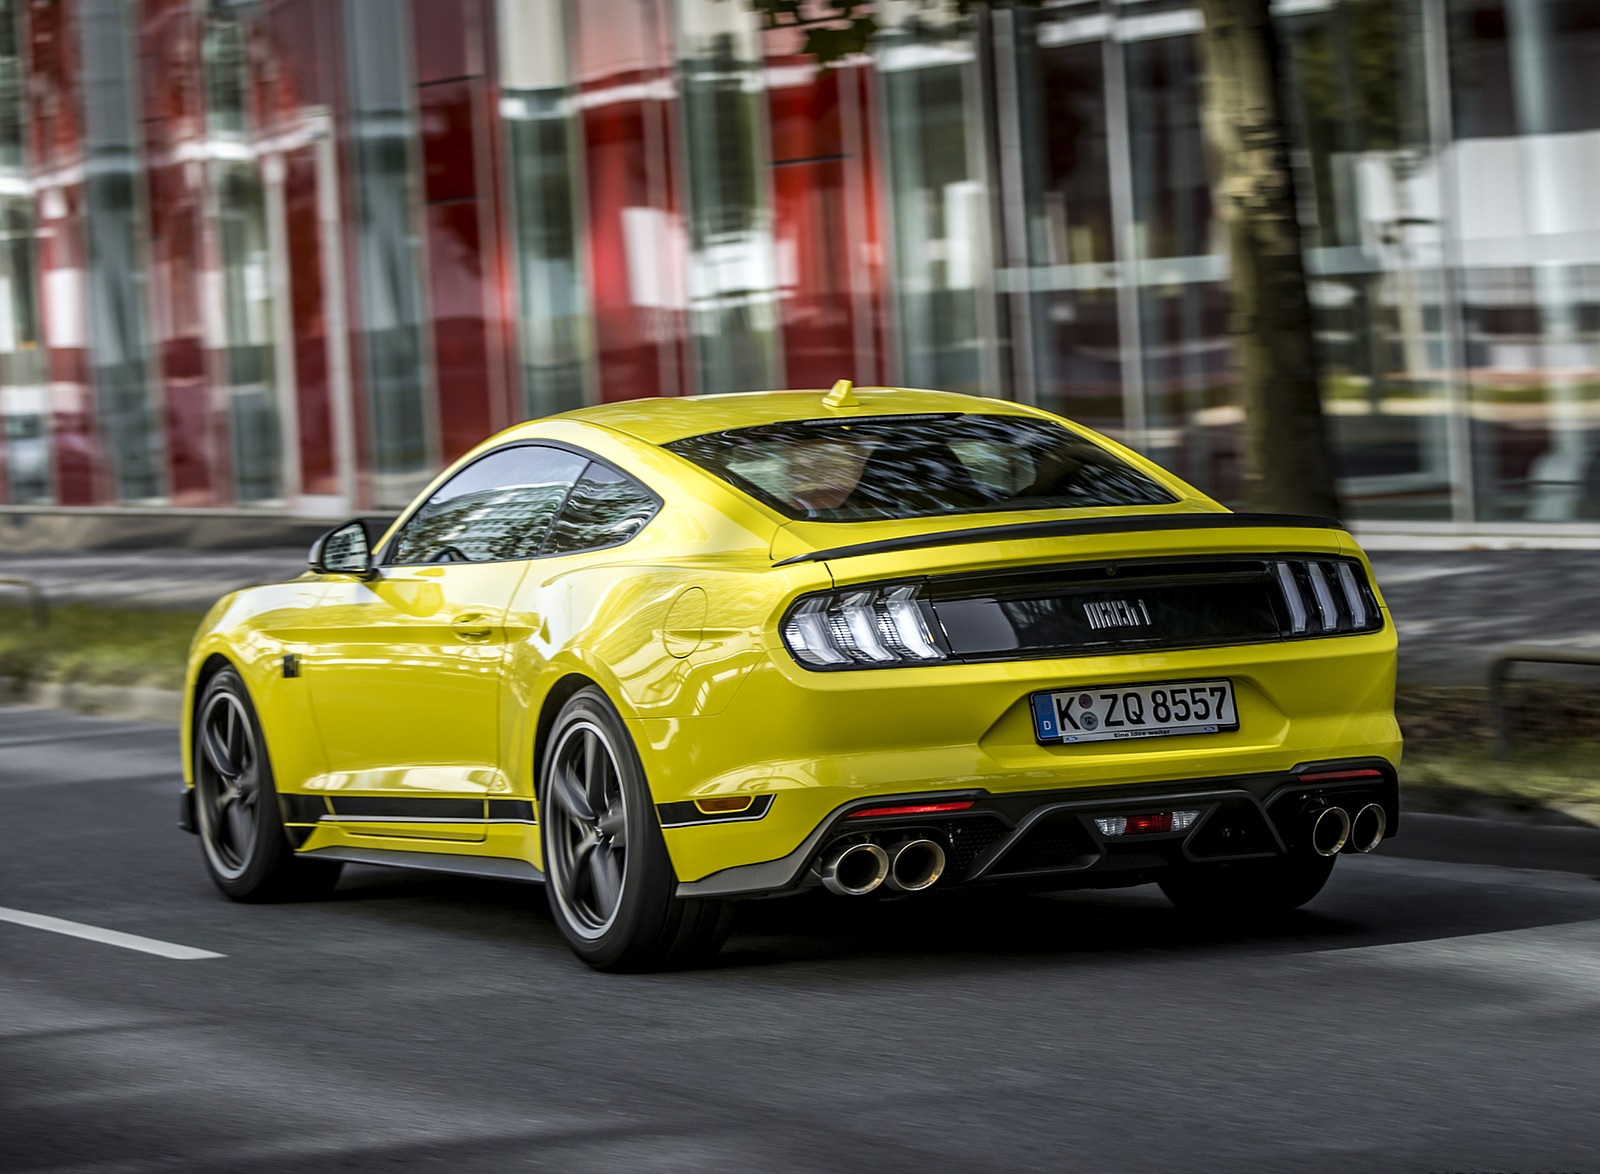 2021 Ford Mustang Mach 1 (EU-Spec) (Color: Grabber Yellow) Rear Three-Quarter Wallpapers  #11 of 94